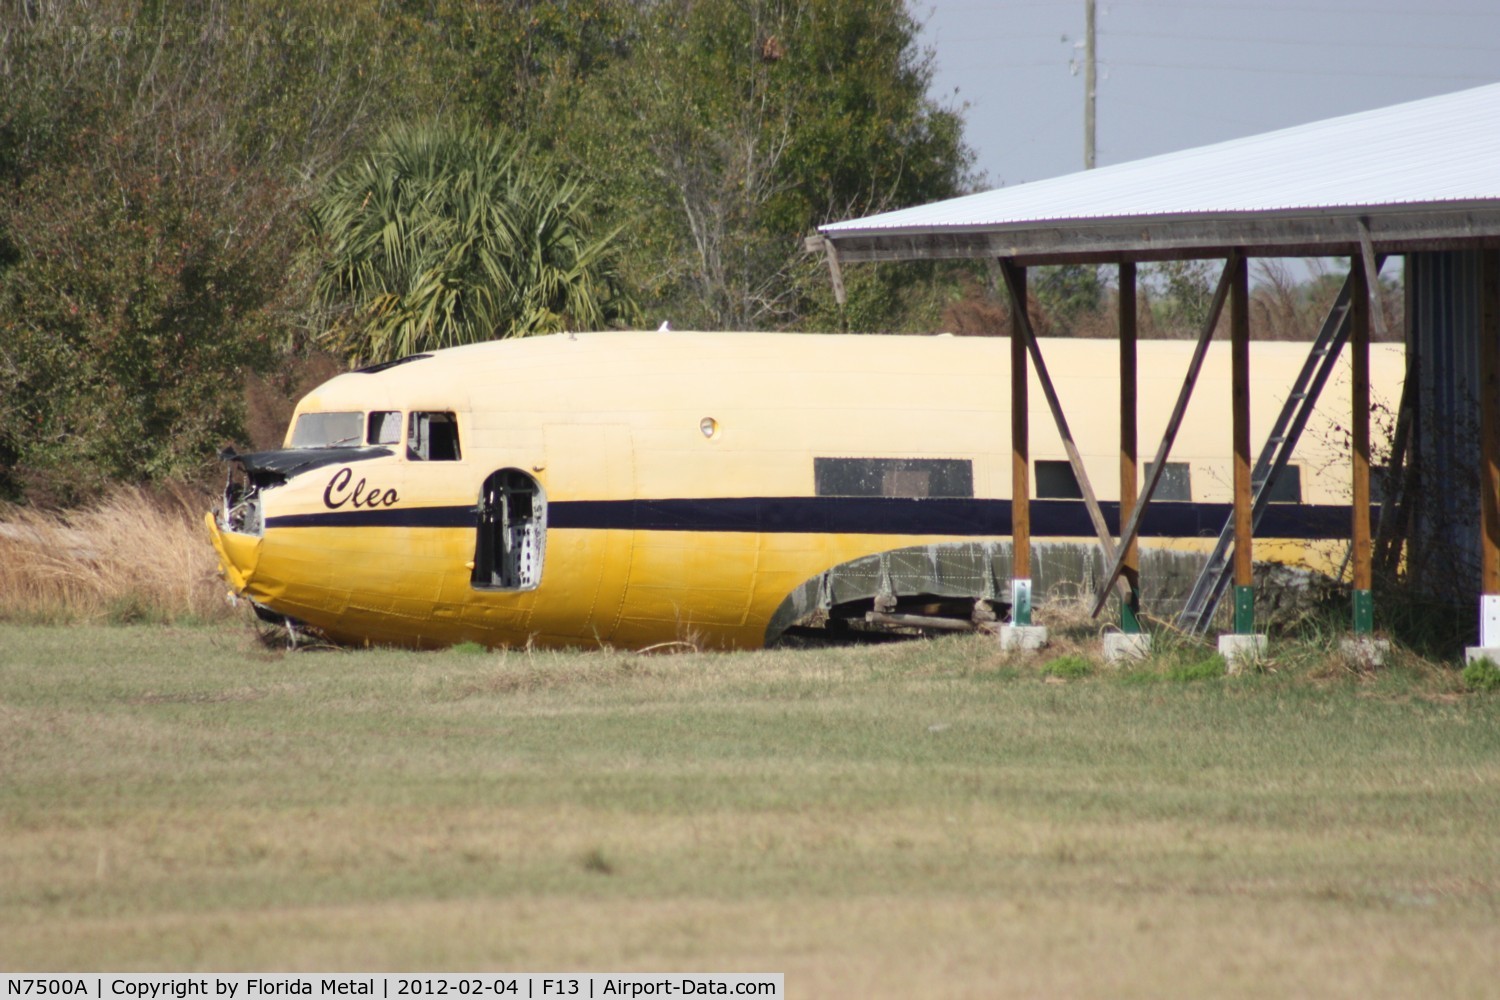 N7500A, 1956 Douglas DC-3 C/N 11693, This is actually a fuselage of a Douglas C-53 that was written off by Hurricane Charley in 2004